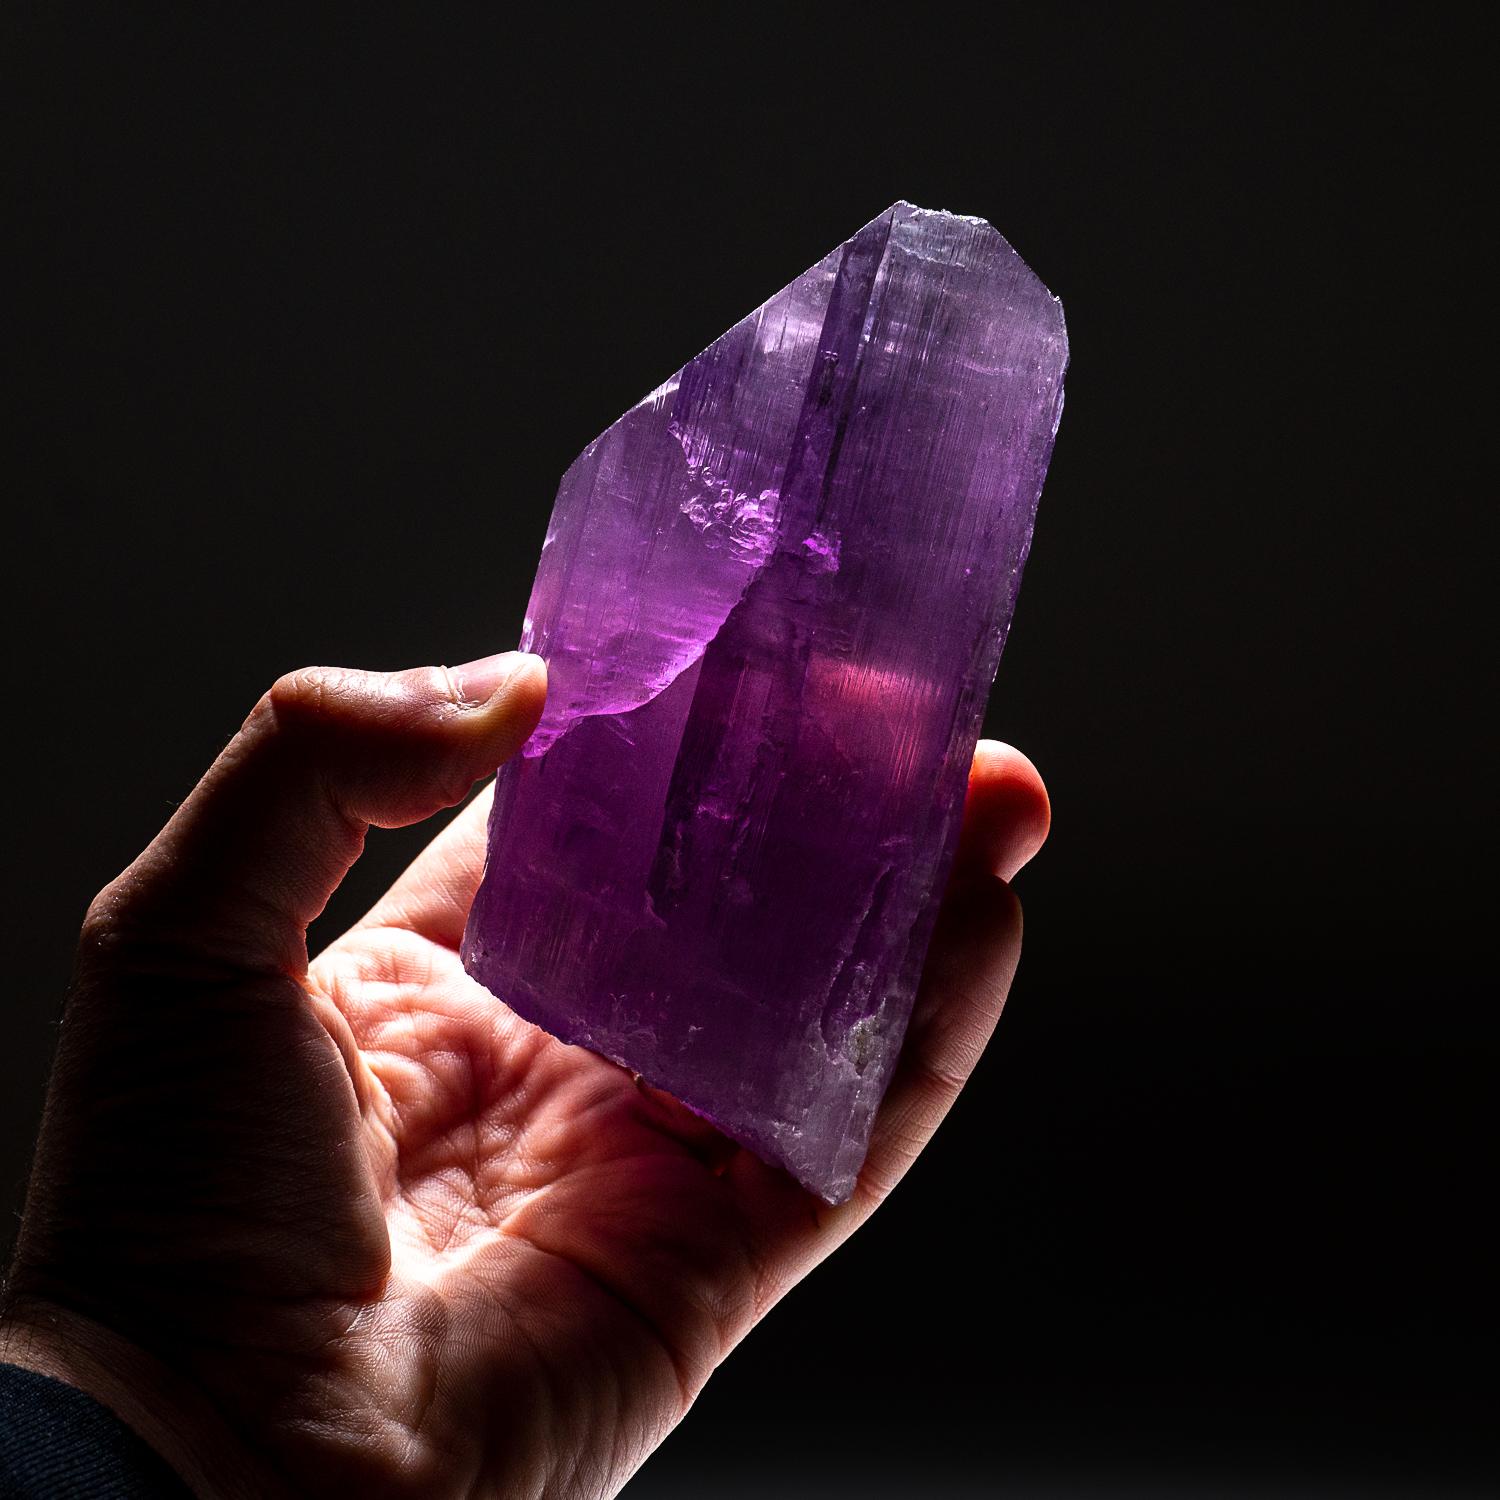 Large single crystal of transparent, pink spodumene Kunzite with striated prism faces and chisel-shaped termination.

Kunzite is a beautiful crystal, pure in energy and joyful in nature. In palest pink to light violet hues, it is a Stone of Emotion,